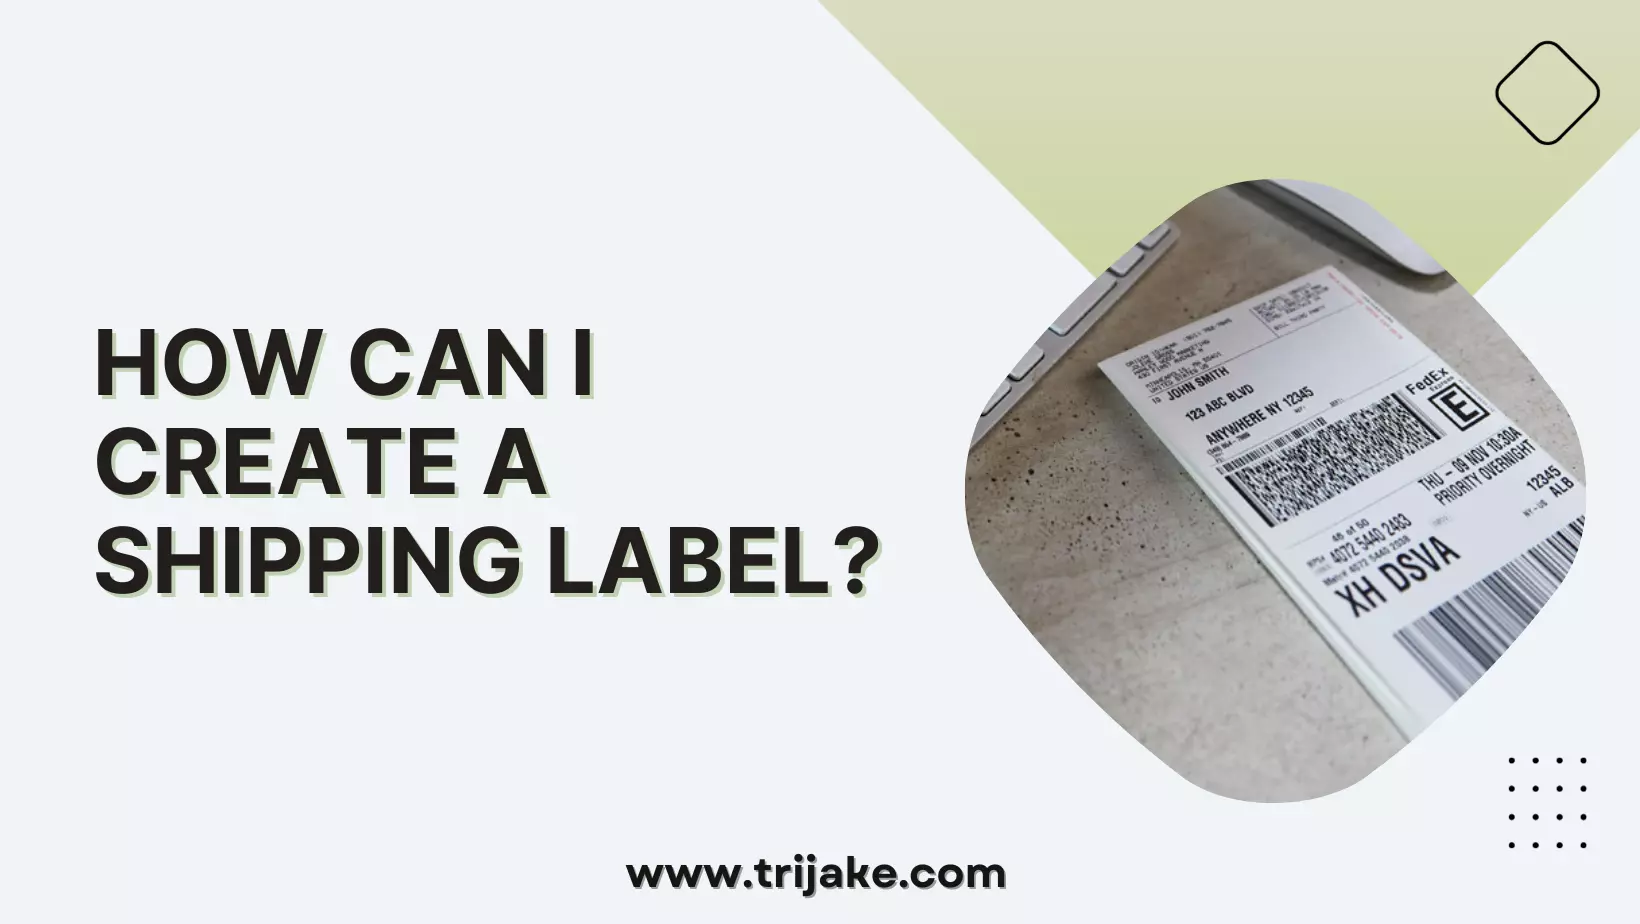 How Can I Create a Shipping Label